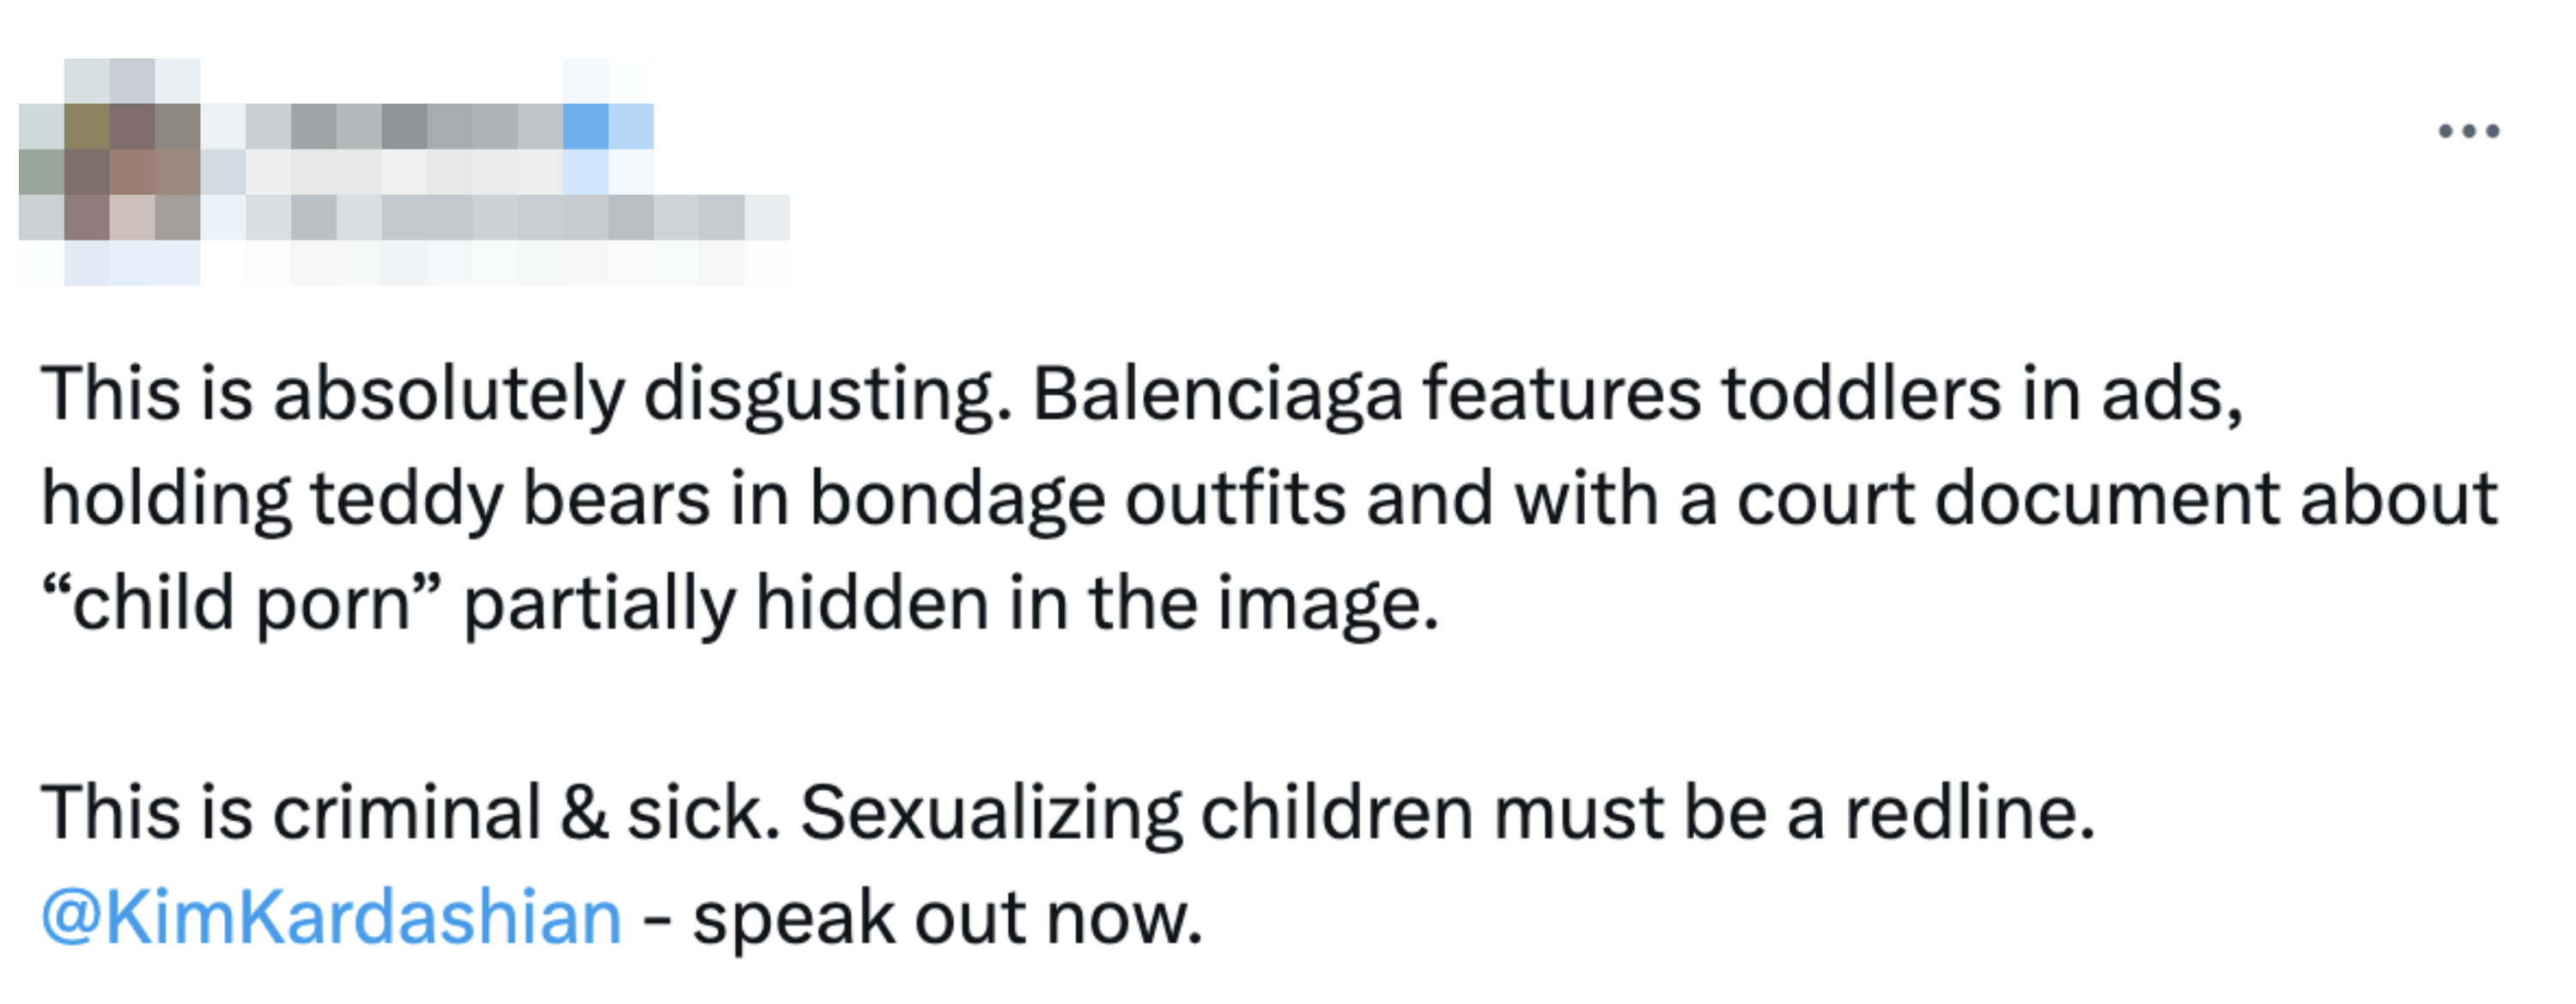 &quot;Balenciaga features toddlers in ads, holding teddy bears in bondage outfits and with a court document about &#x27;child porn&#x27; partially hidden in the image; this is criminal &amp;amp; sick; sexualizing children must be a redline @KimKardashian - speak out now&quot;